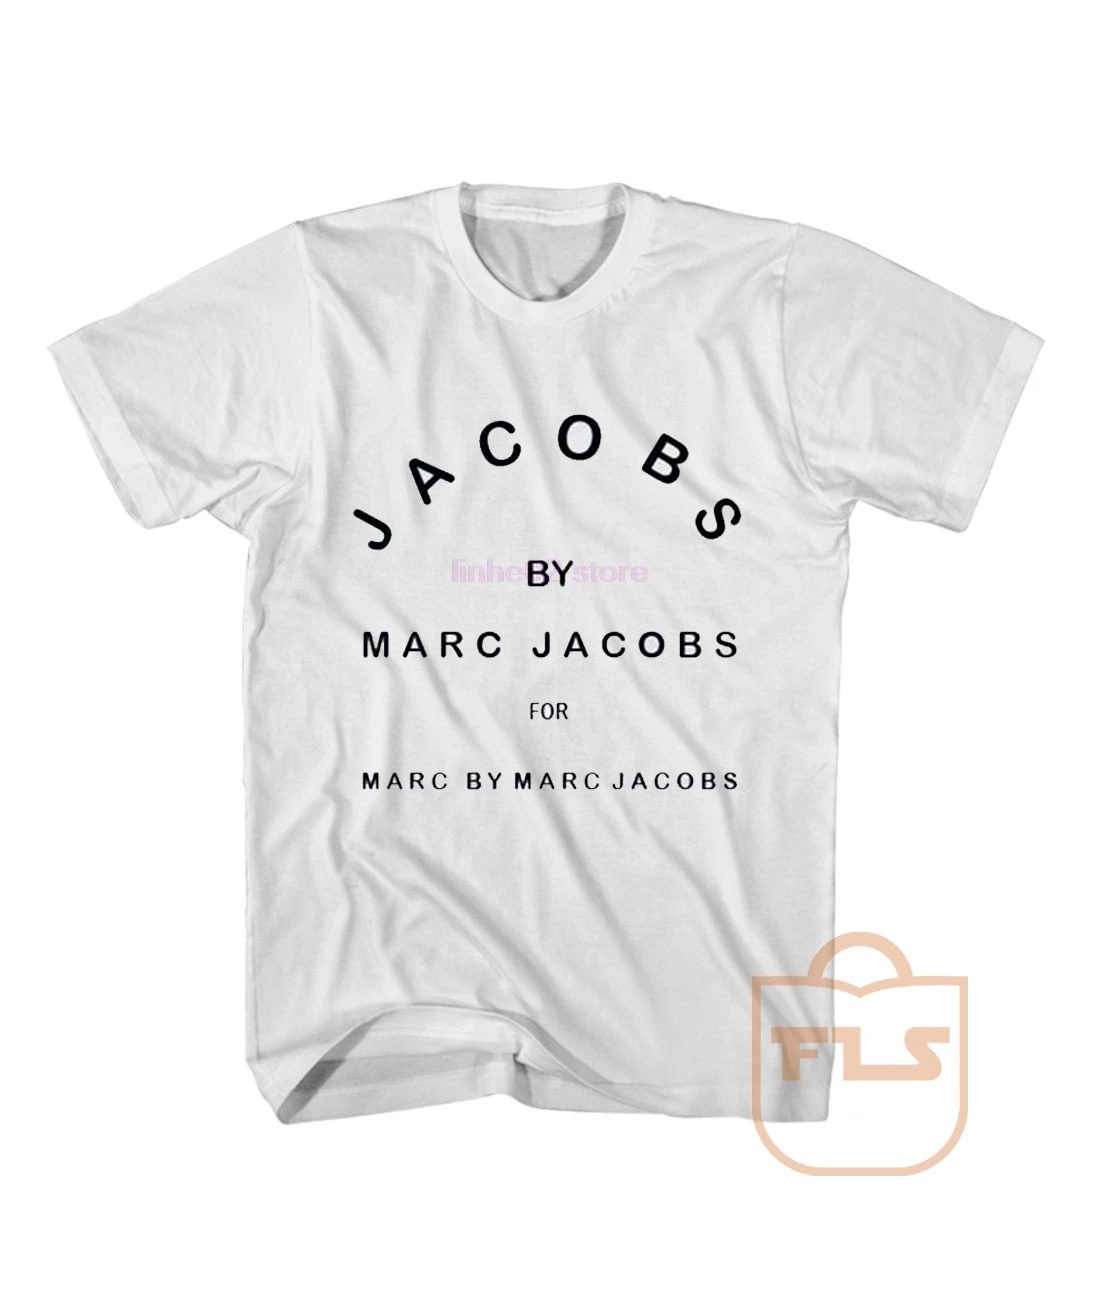 

Marc Jacobs T Shirt Different color high quality T-shirts